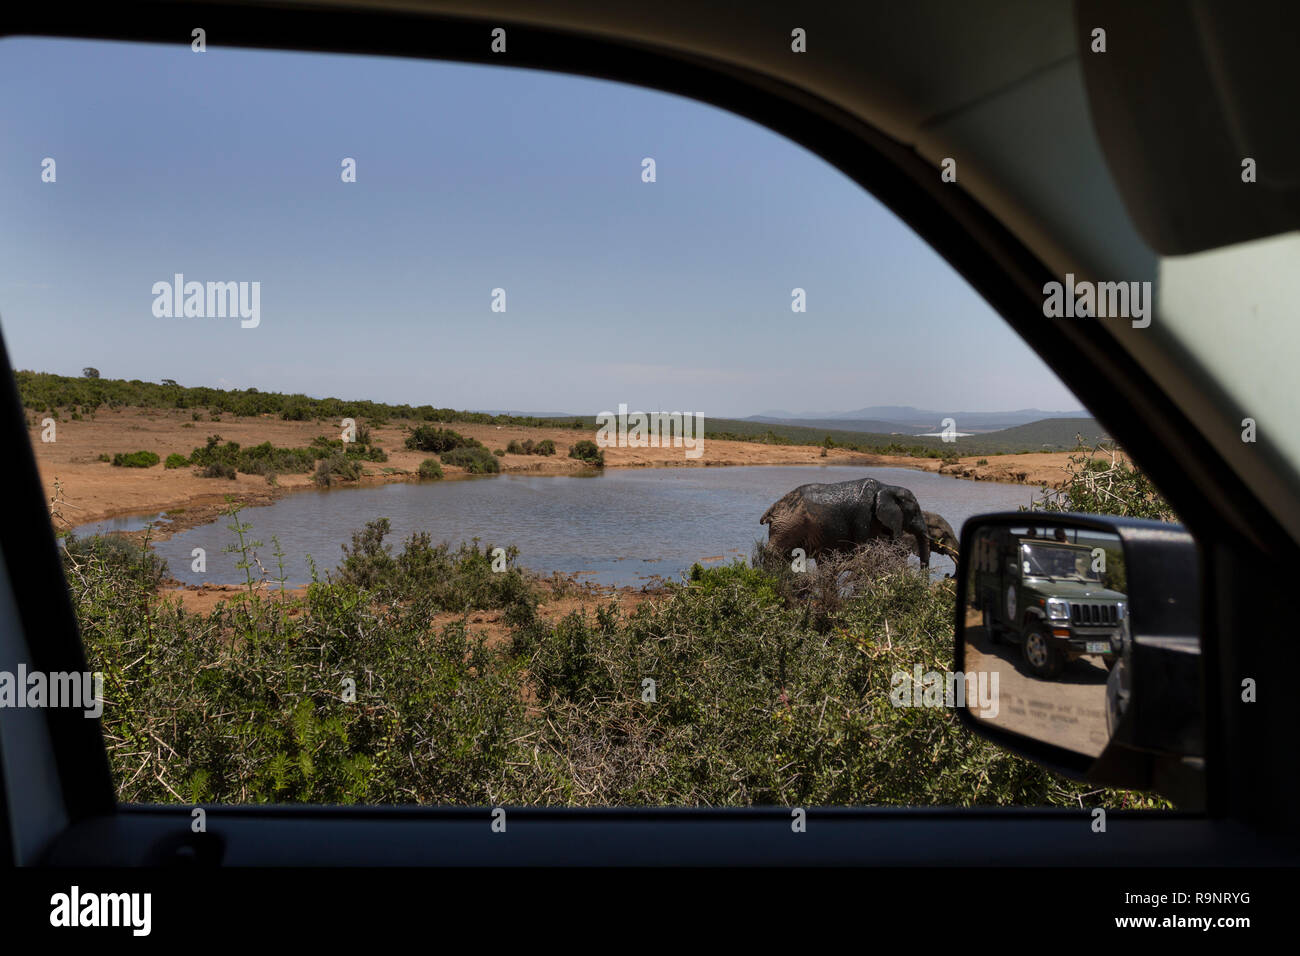 On a safari game drive at Addo Elephant National Park, South Africa. Watching a lone elephant at Rooidam waterhole. Stock Photo